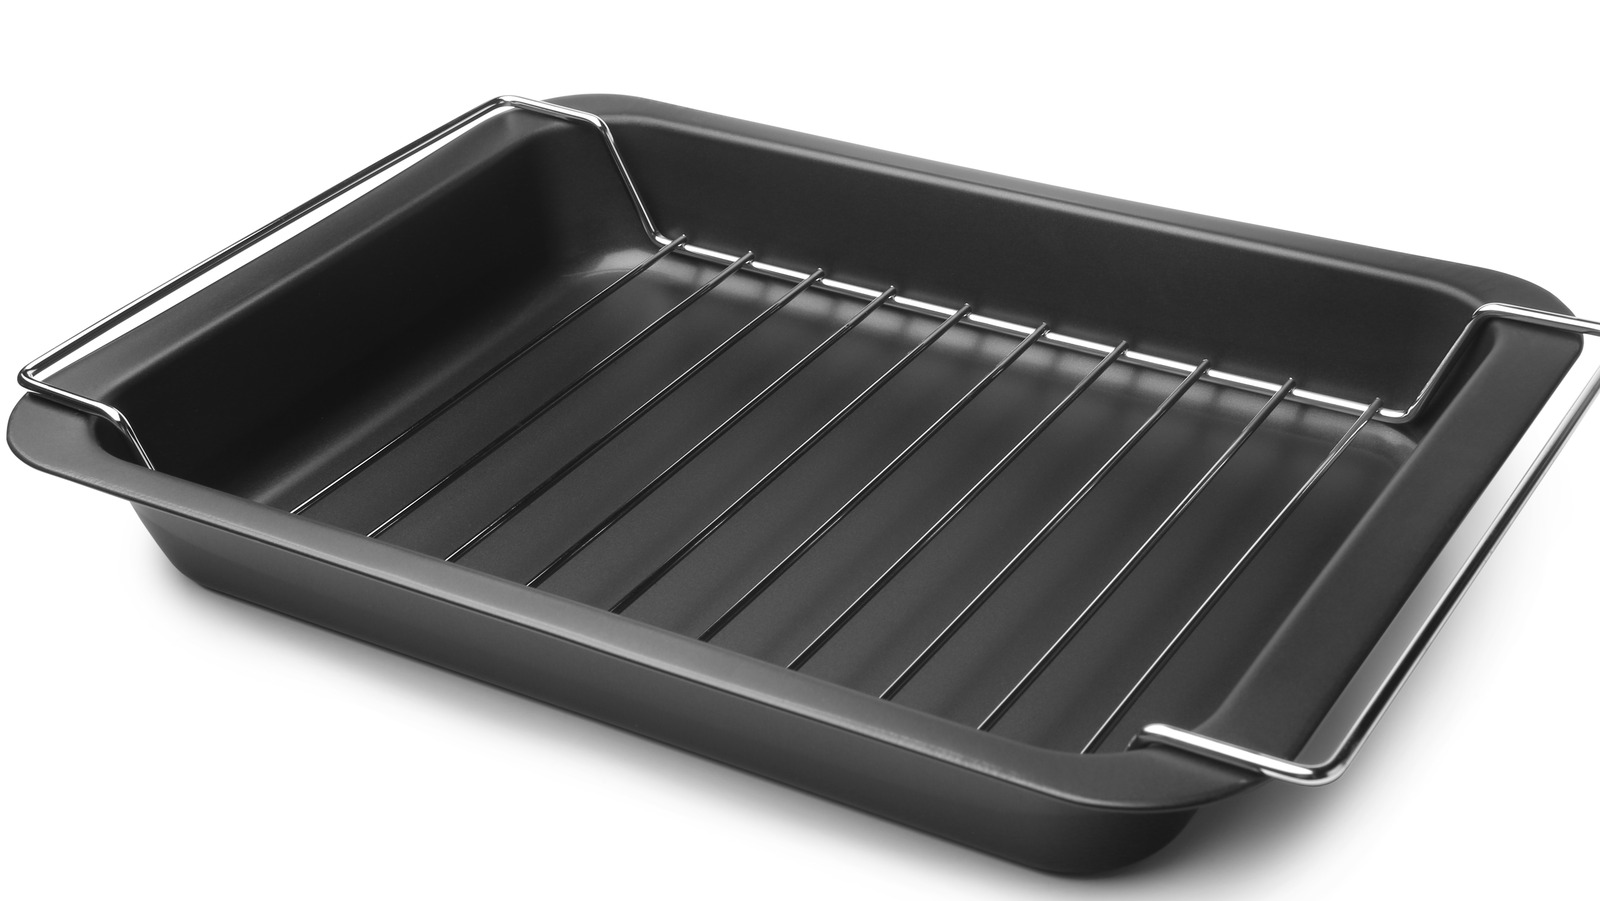 9 Inch x 13 Inch Pan and Lid Set - King Arthur Baking Company